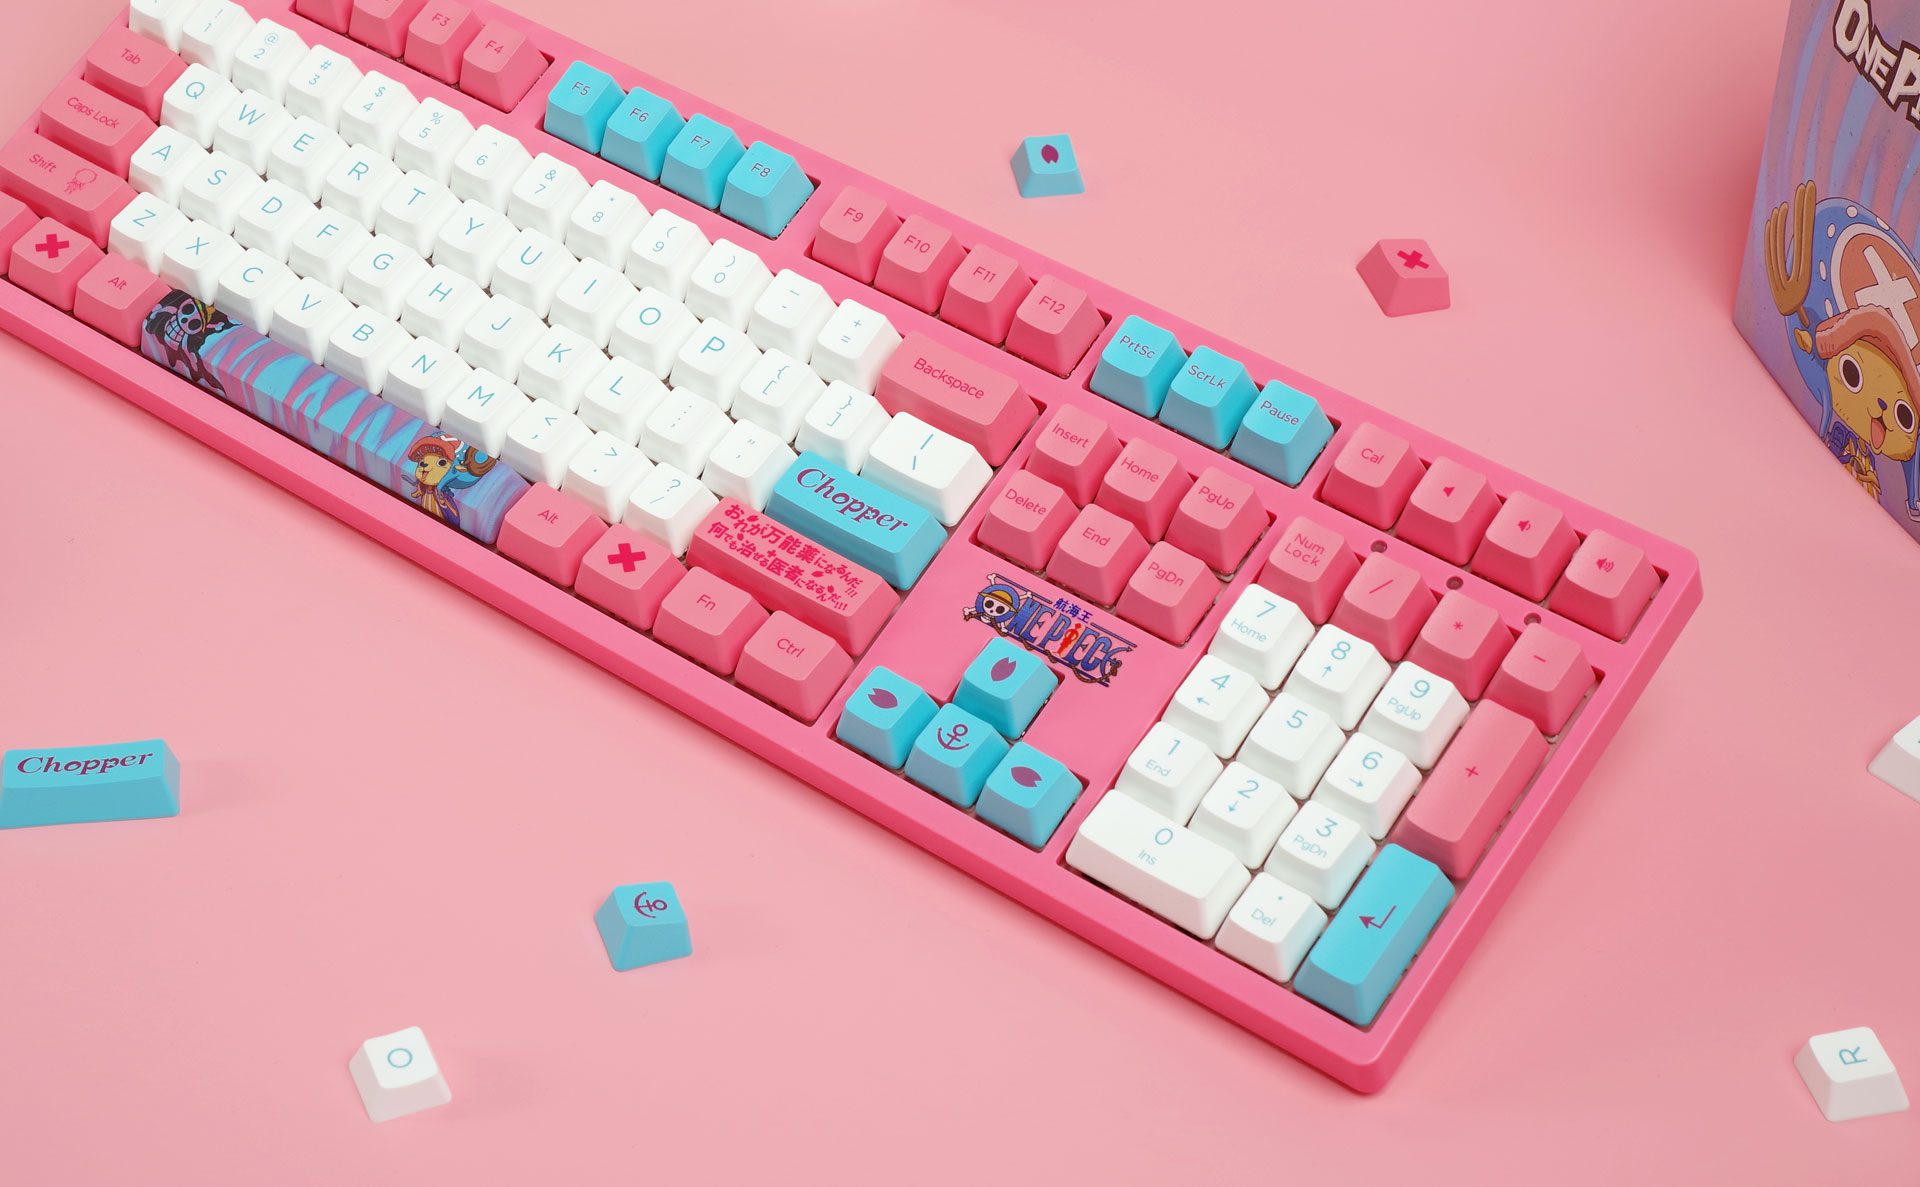 Akko 3108 V2 One Piec Choppe Full-Size Mechanical Gaming Keyboard Wired 108-key with OEM profile PBT Dye-Sublimation Keycaps